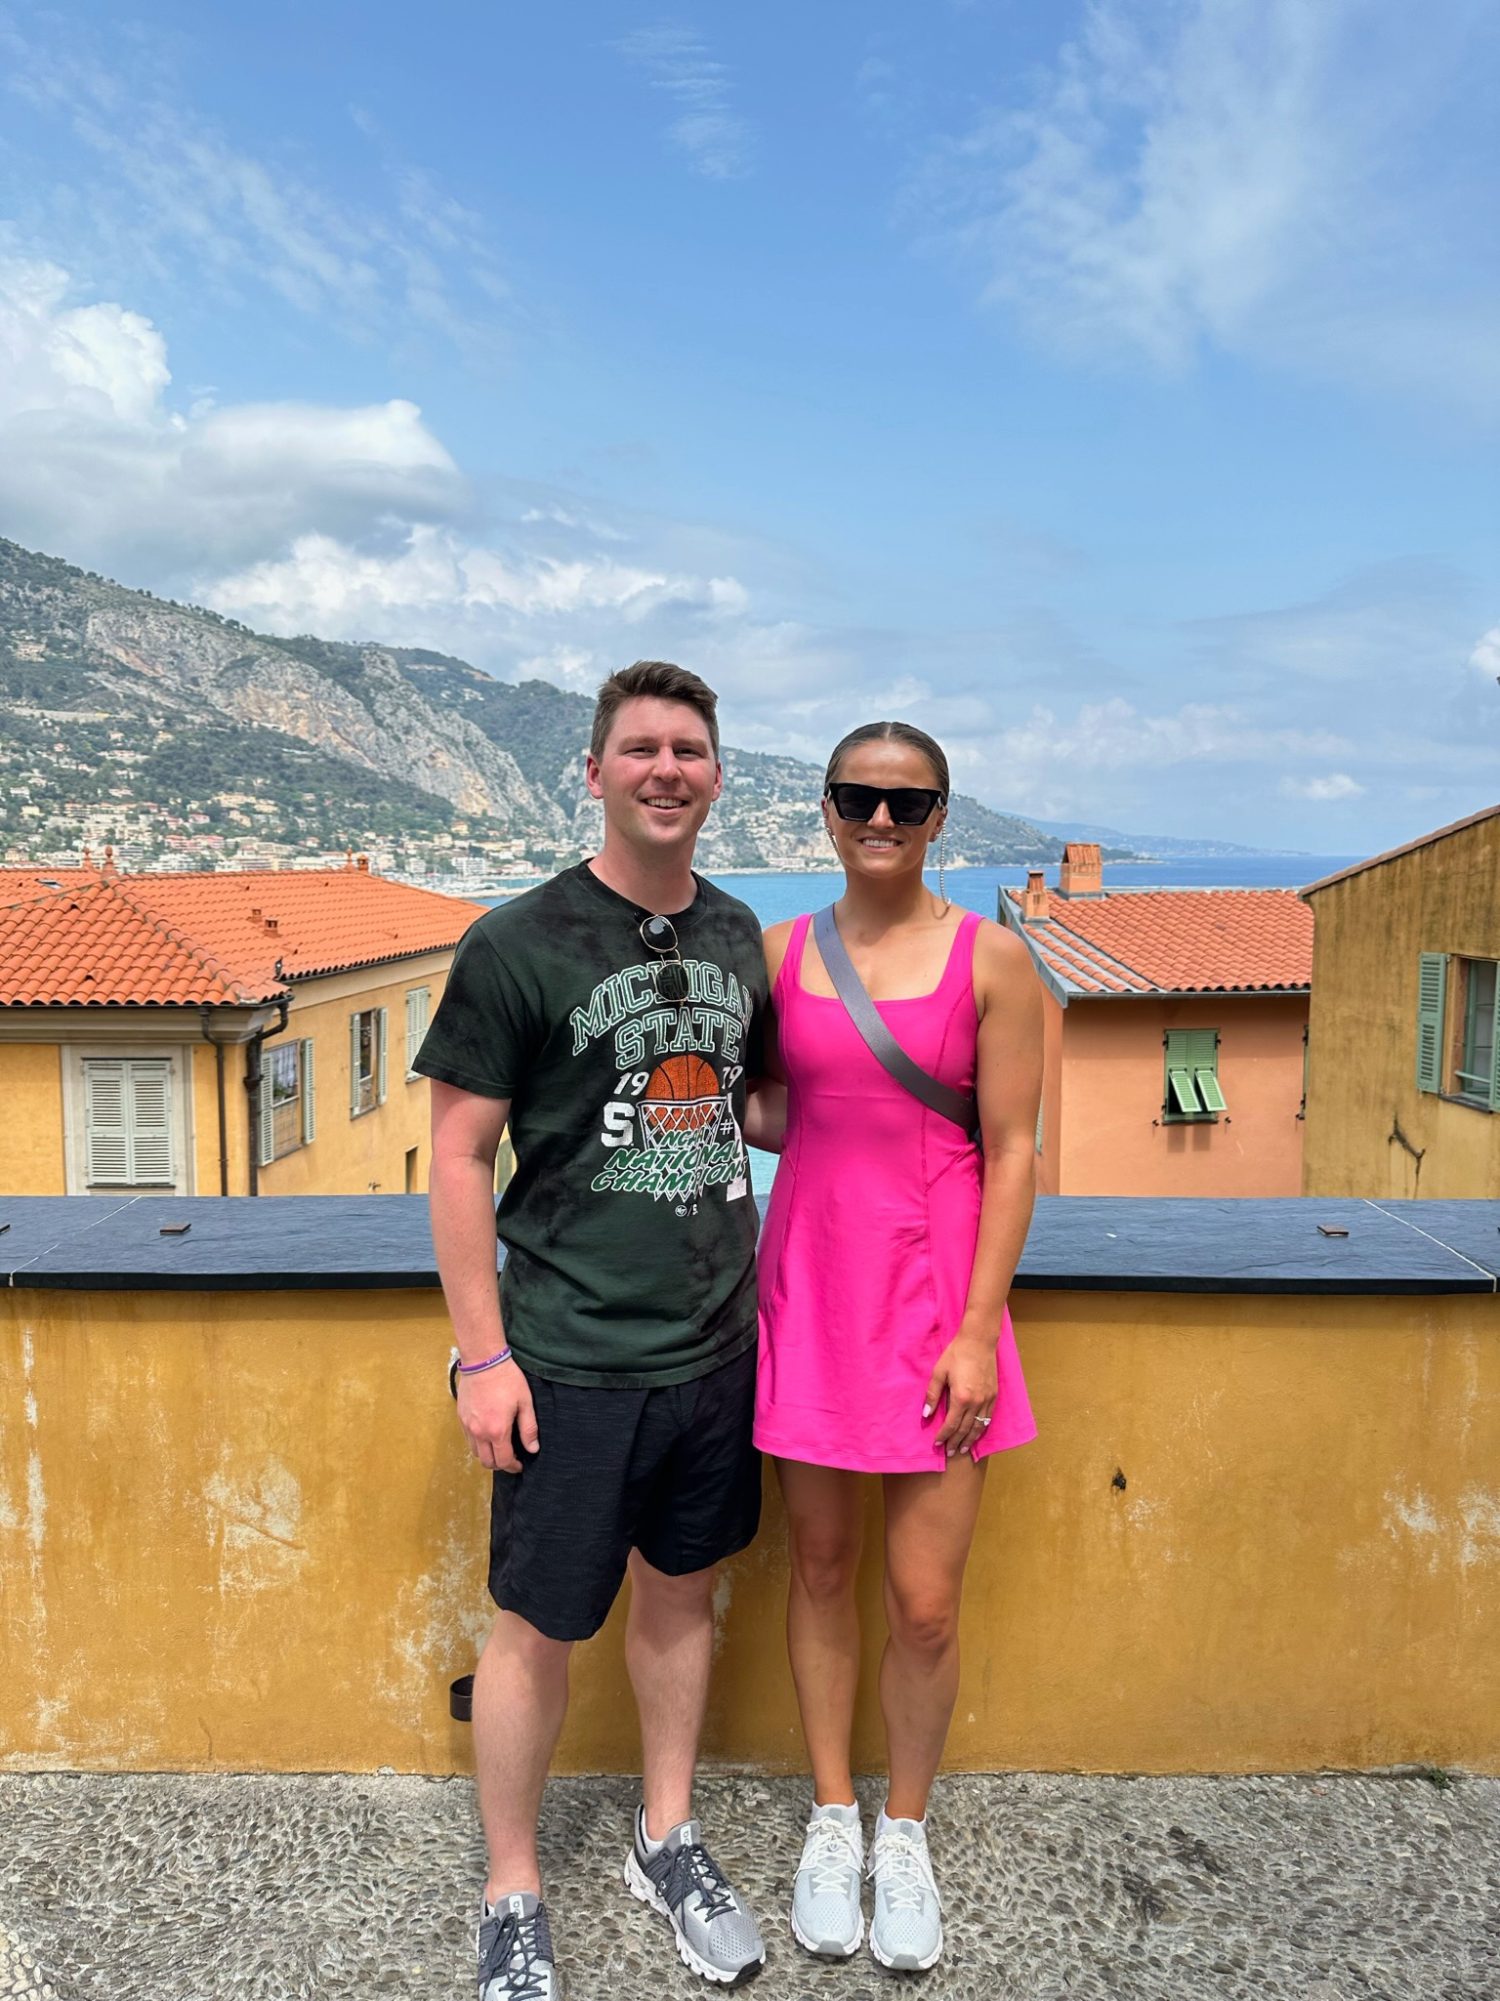 Jack and Courtney at the top of Menton, France overlooking the ocean.